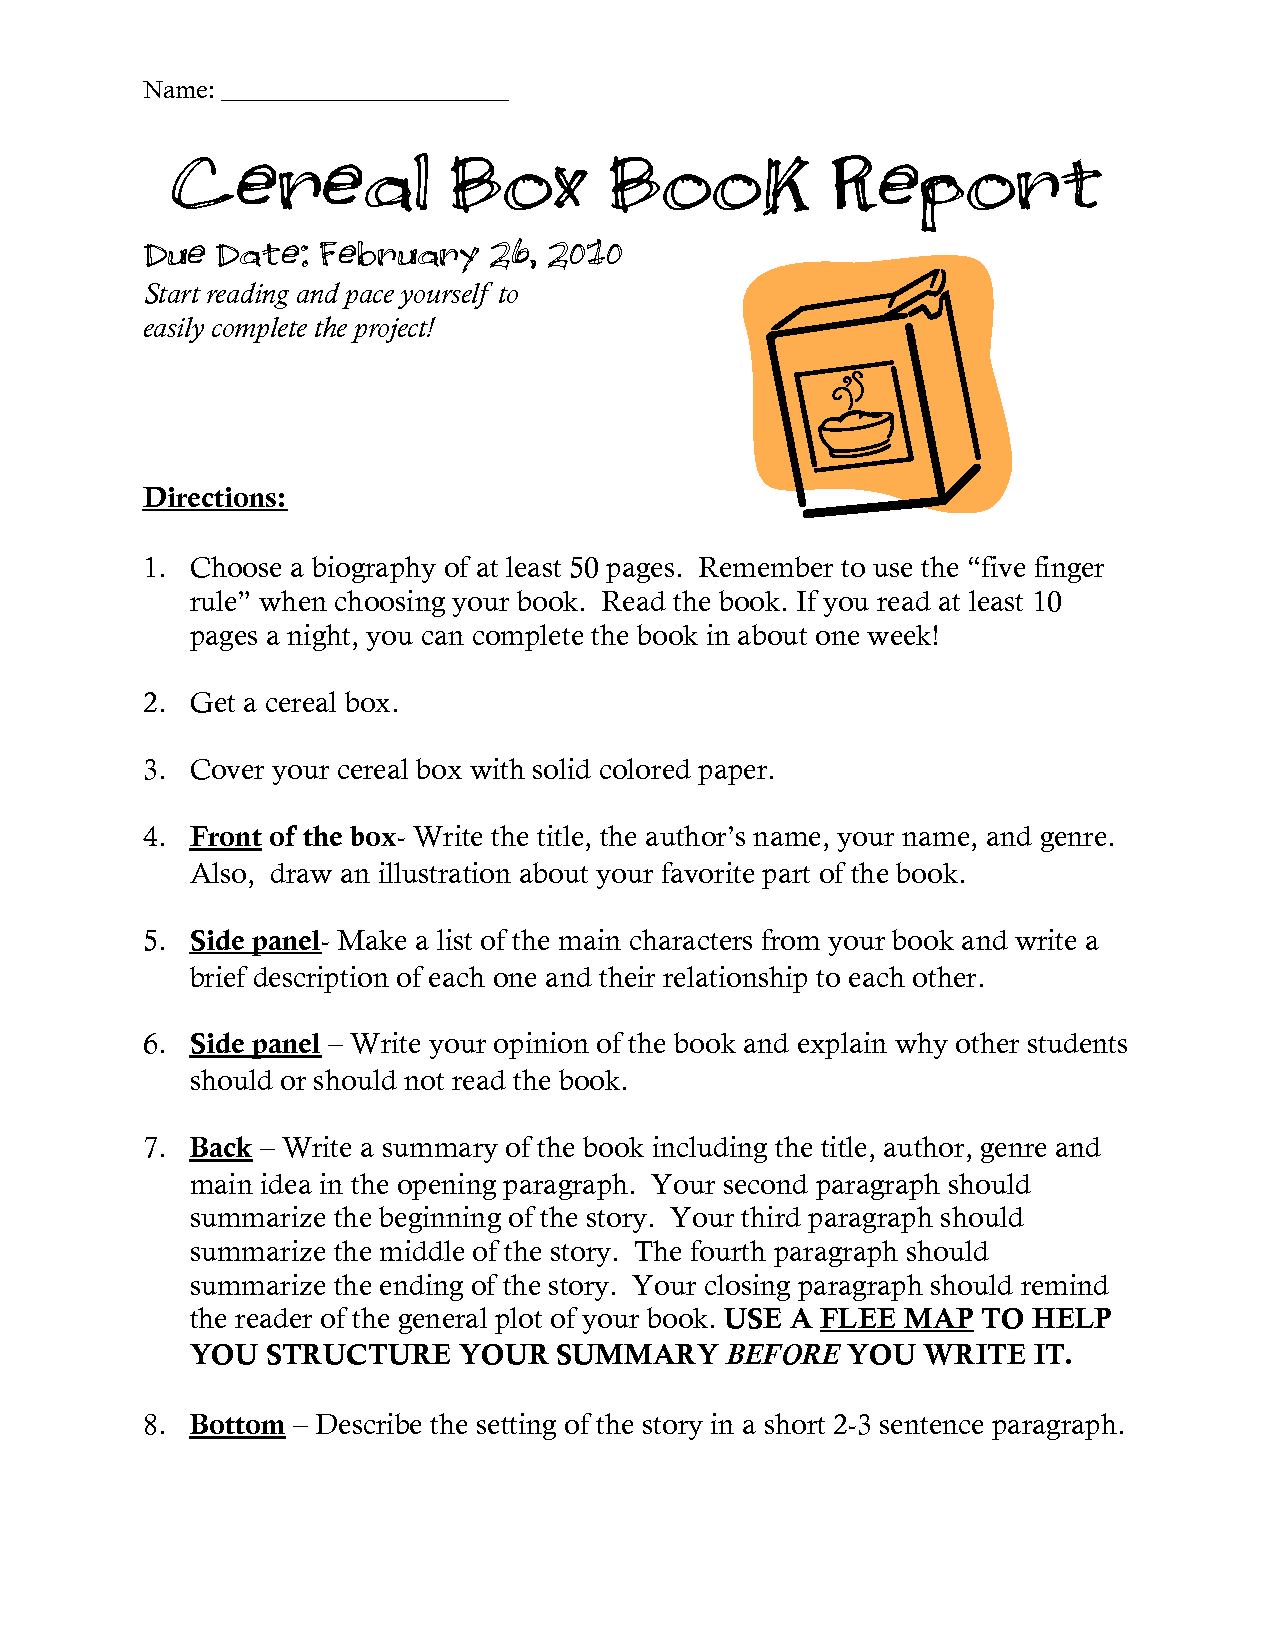 Book Report Project Instructions In Cereal Box Book Report Template